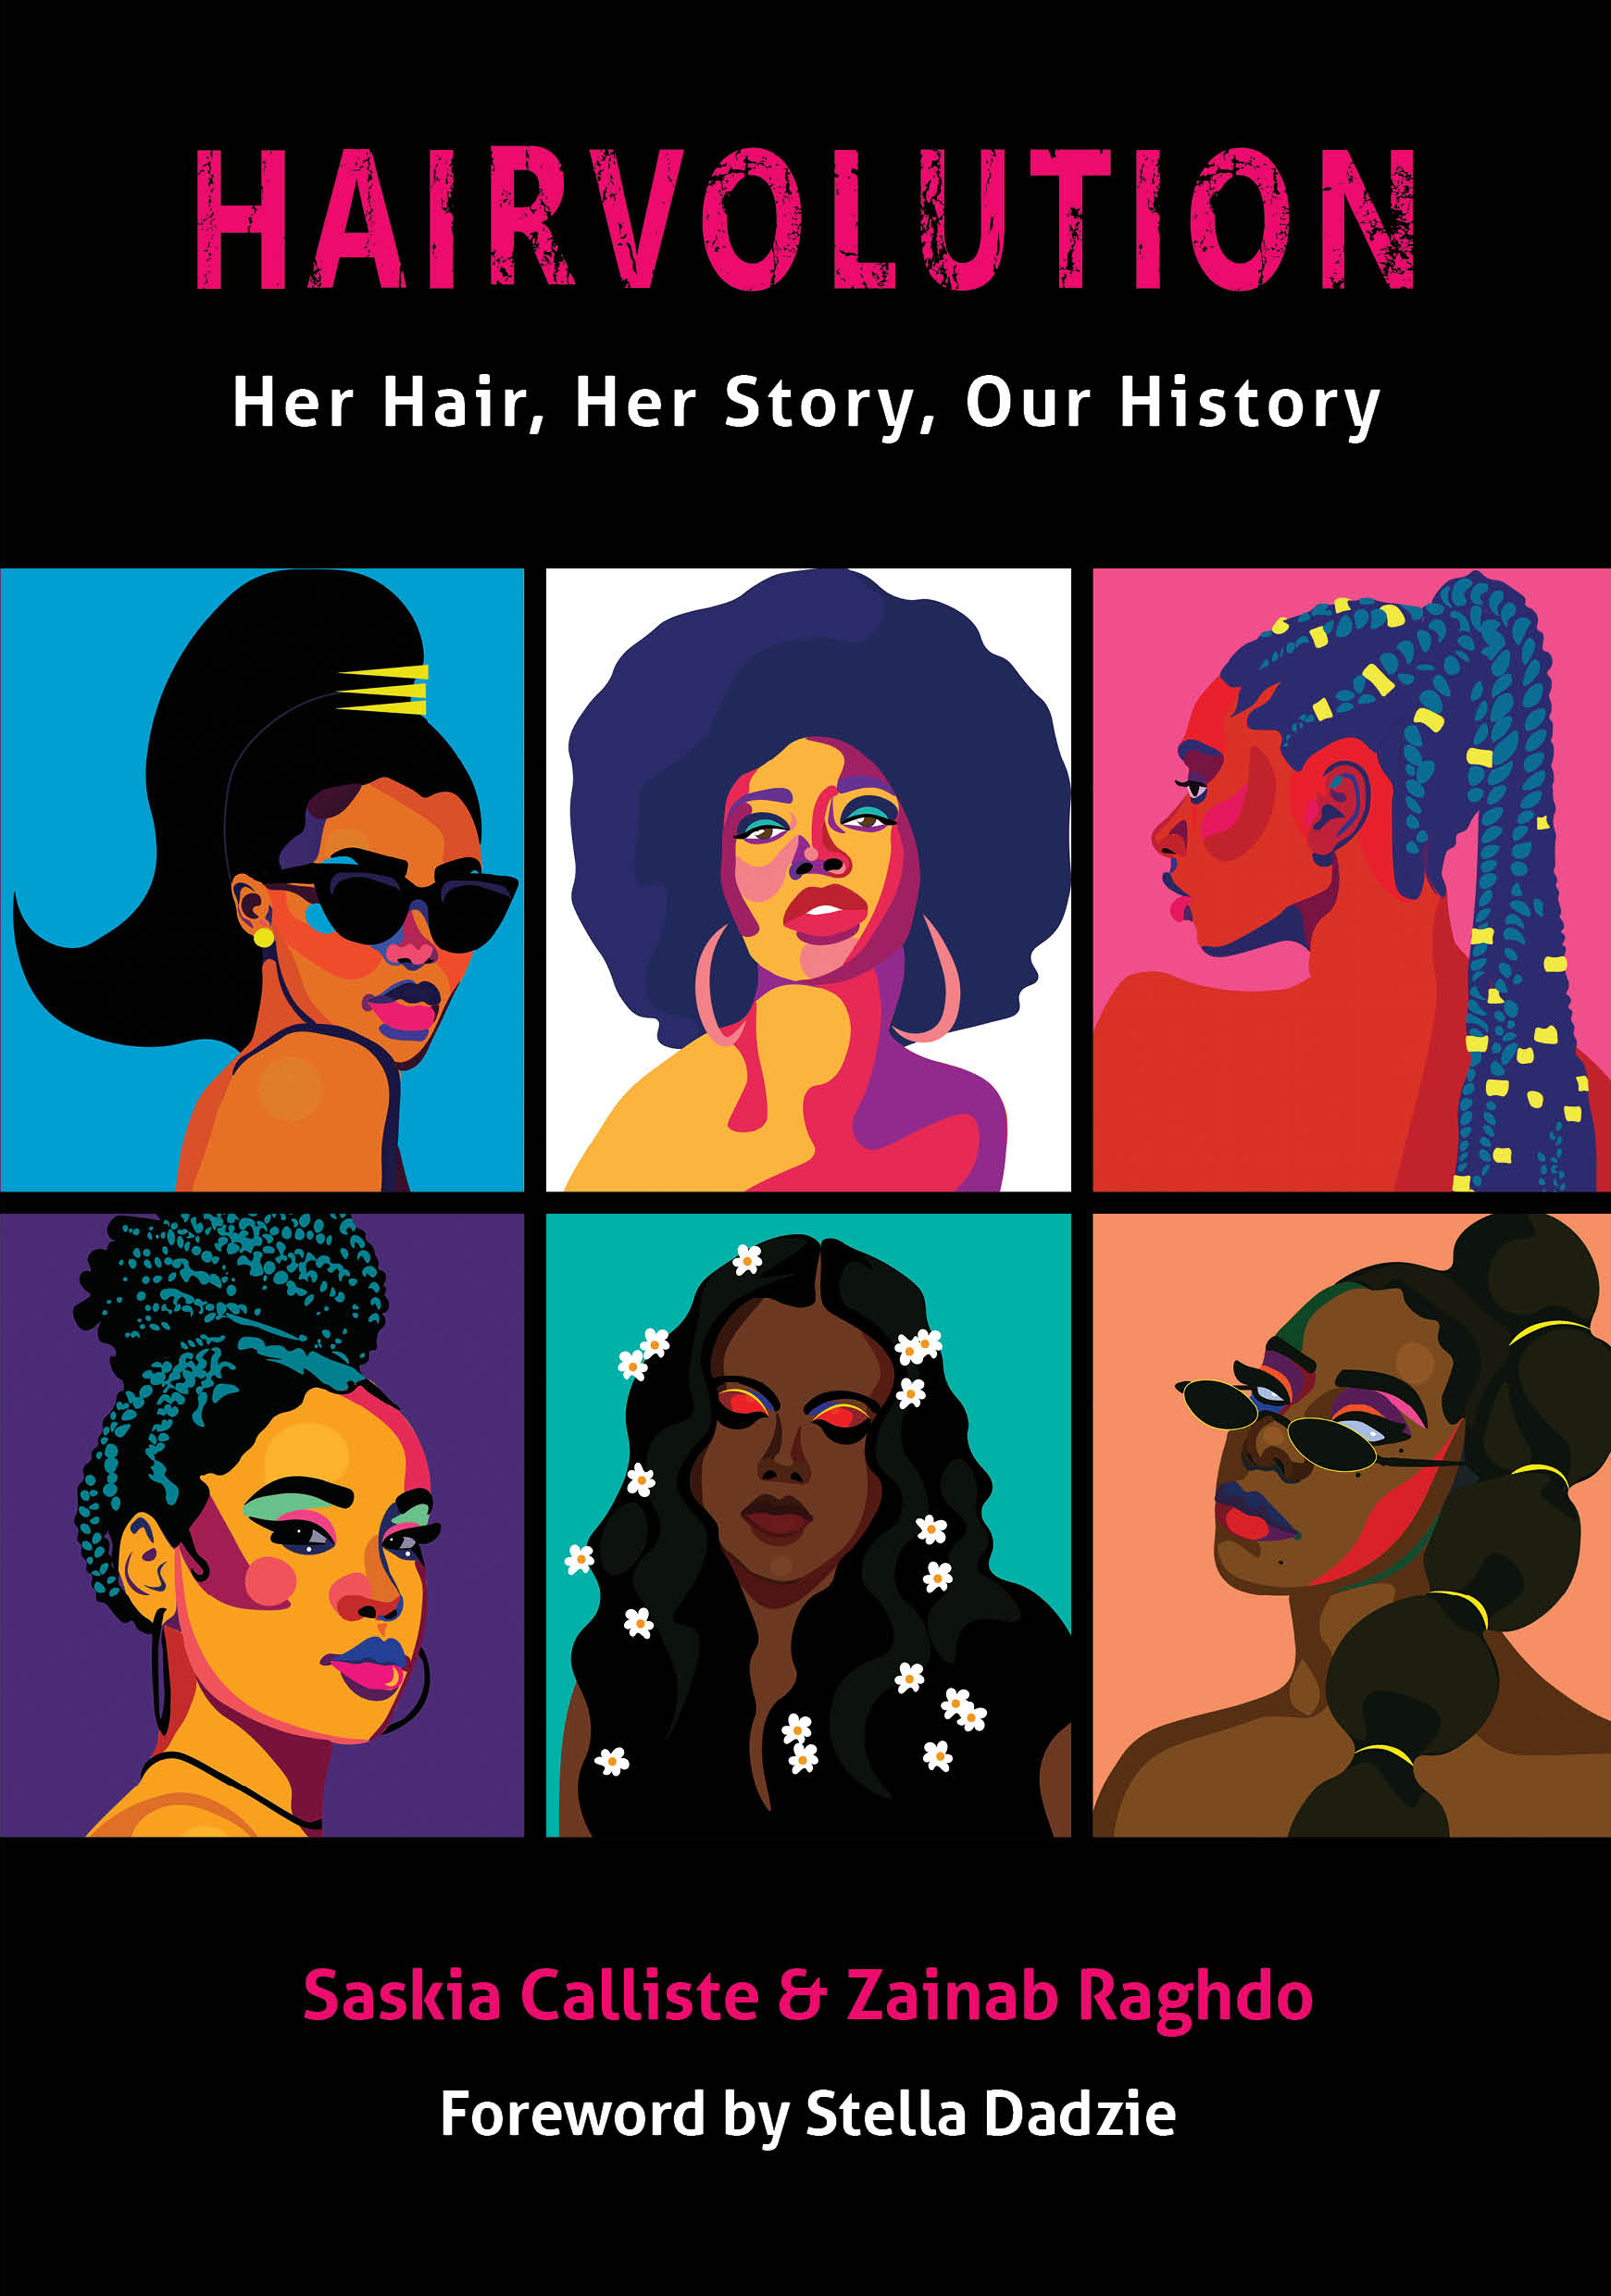 Hairvolution book launches on World Afro Day